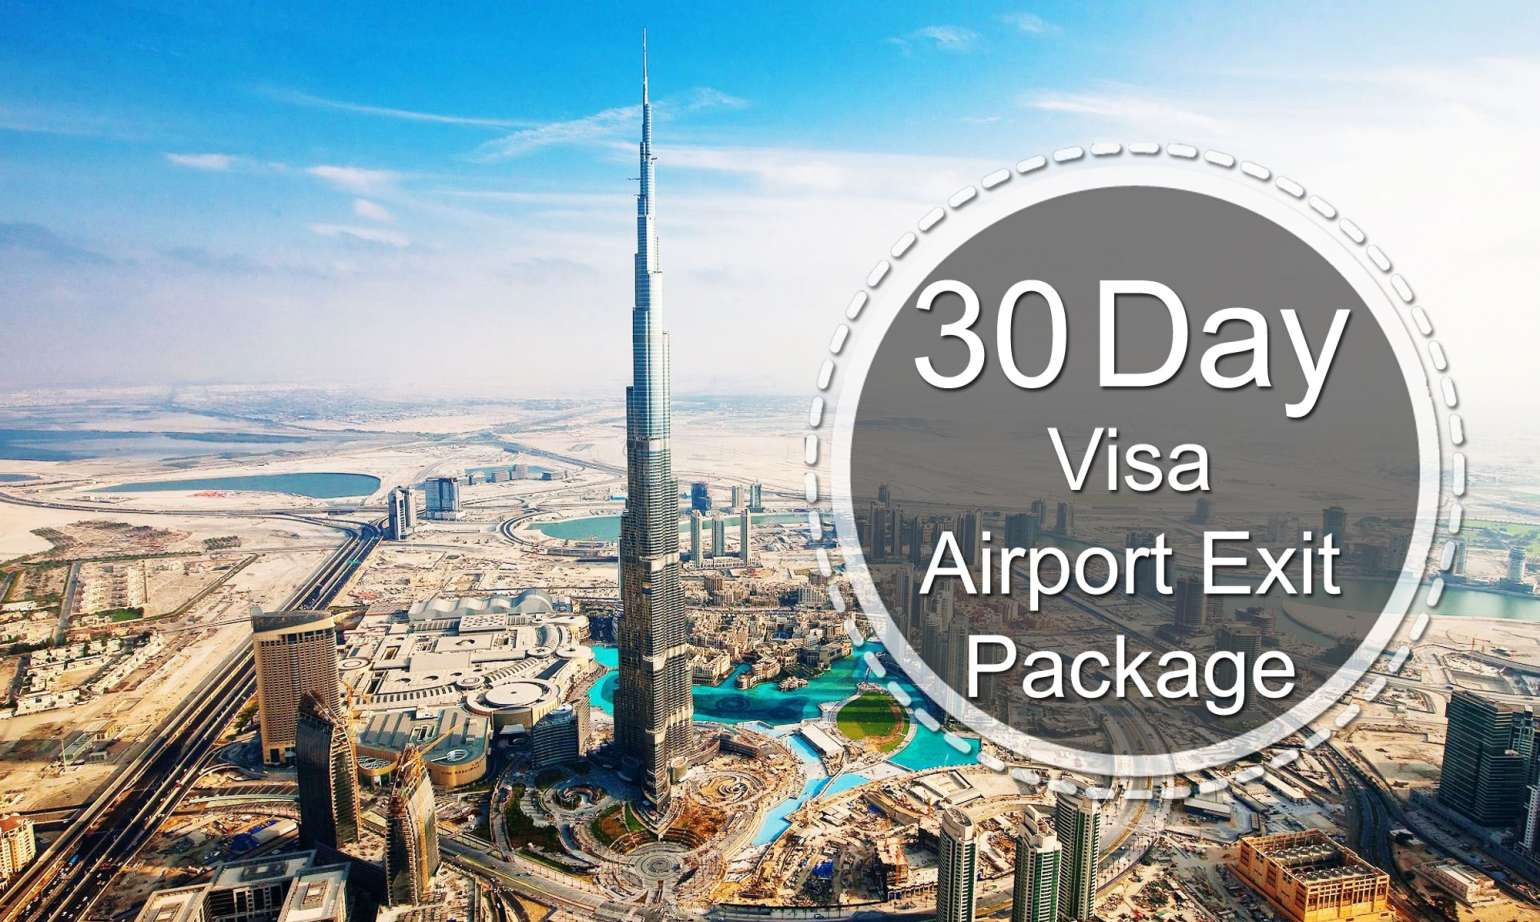 Airport Exit Package With 30 Days Visa